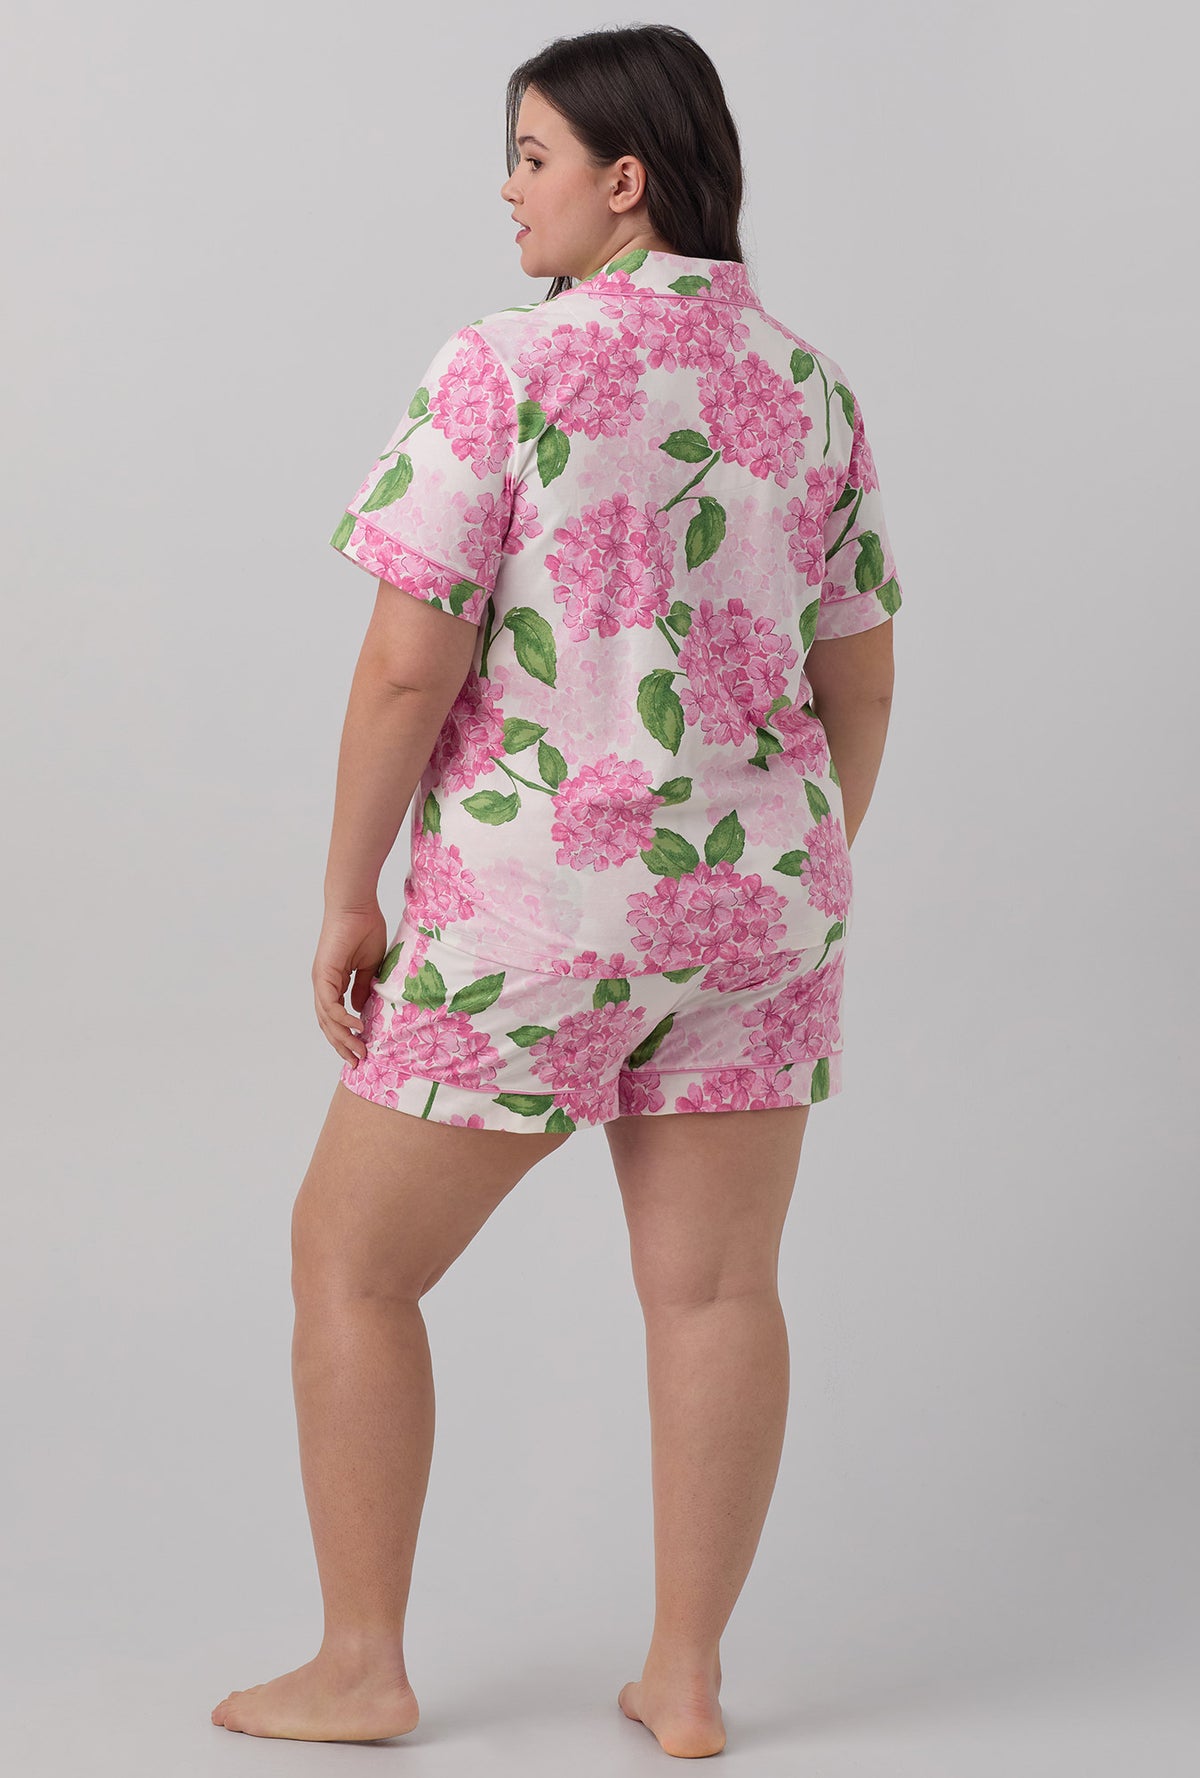 A lady wearing plus size pink  Short Sleeve Classic Shorty Stretch Jersey PJ Set with Grand Hydrangea print.